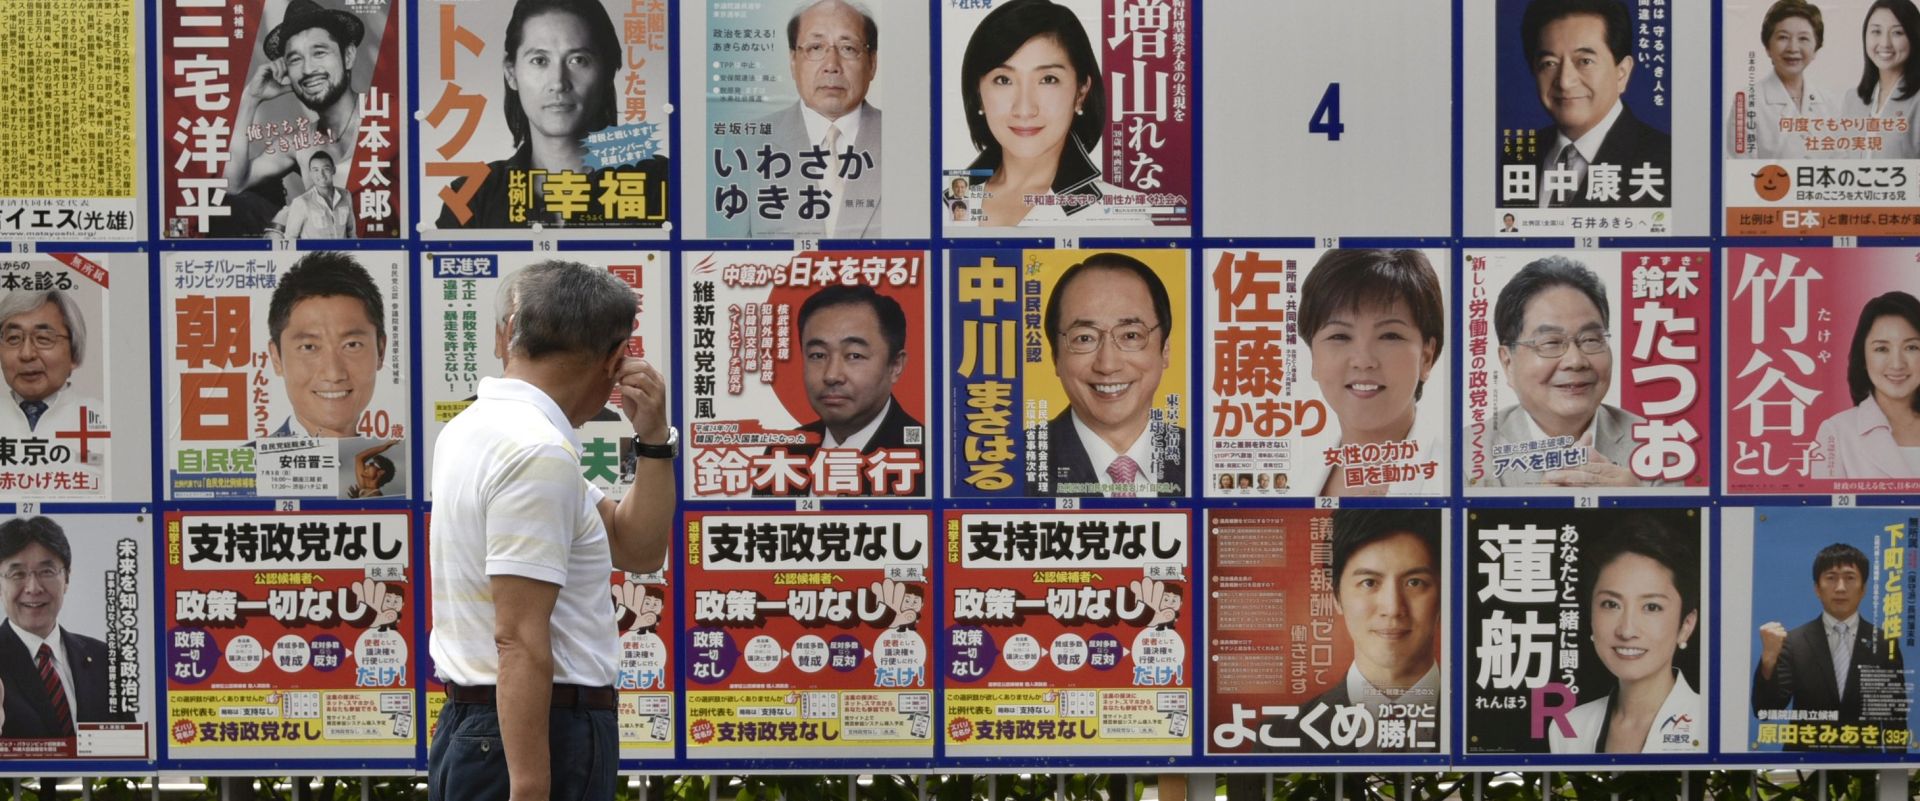 epa05412403 A man looks at posters of candidates for the coming upper house election in Tokyo, Japan, 07 July 2016. According to a survey by Kyodo News agency, the support rating for ruling Liberal Democratic Party (LDP) gained 2.6 points to reach 33.5 percent for the 10 July upper house election while main opposition Democratic Party remained at around 10 percent.  EPA/FRANCK ROBICHON